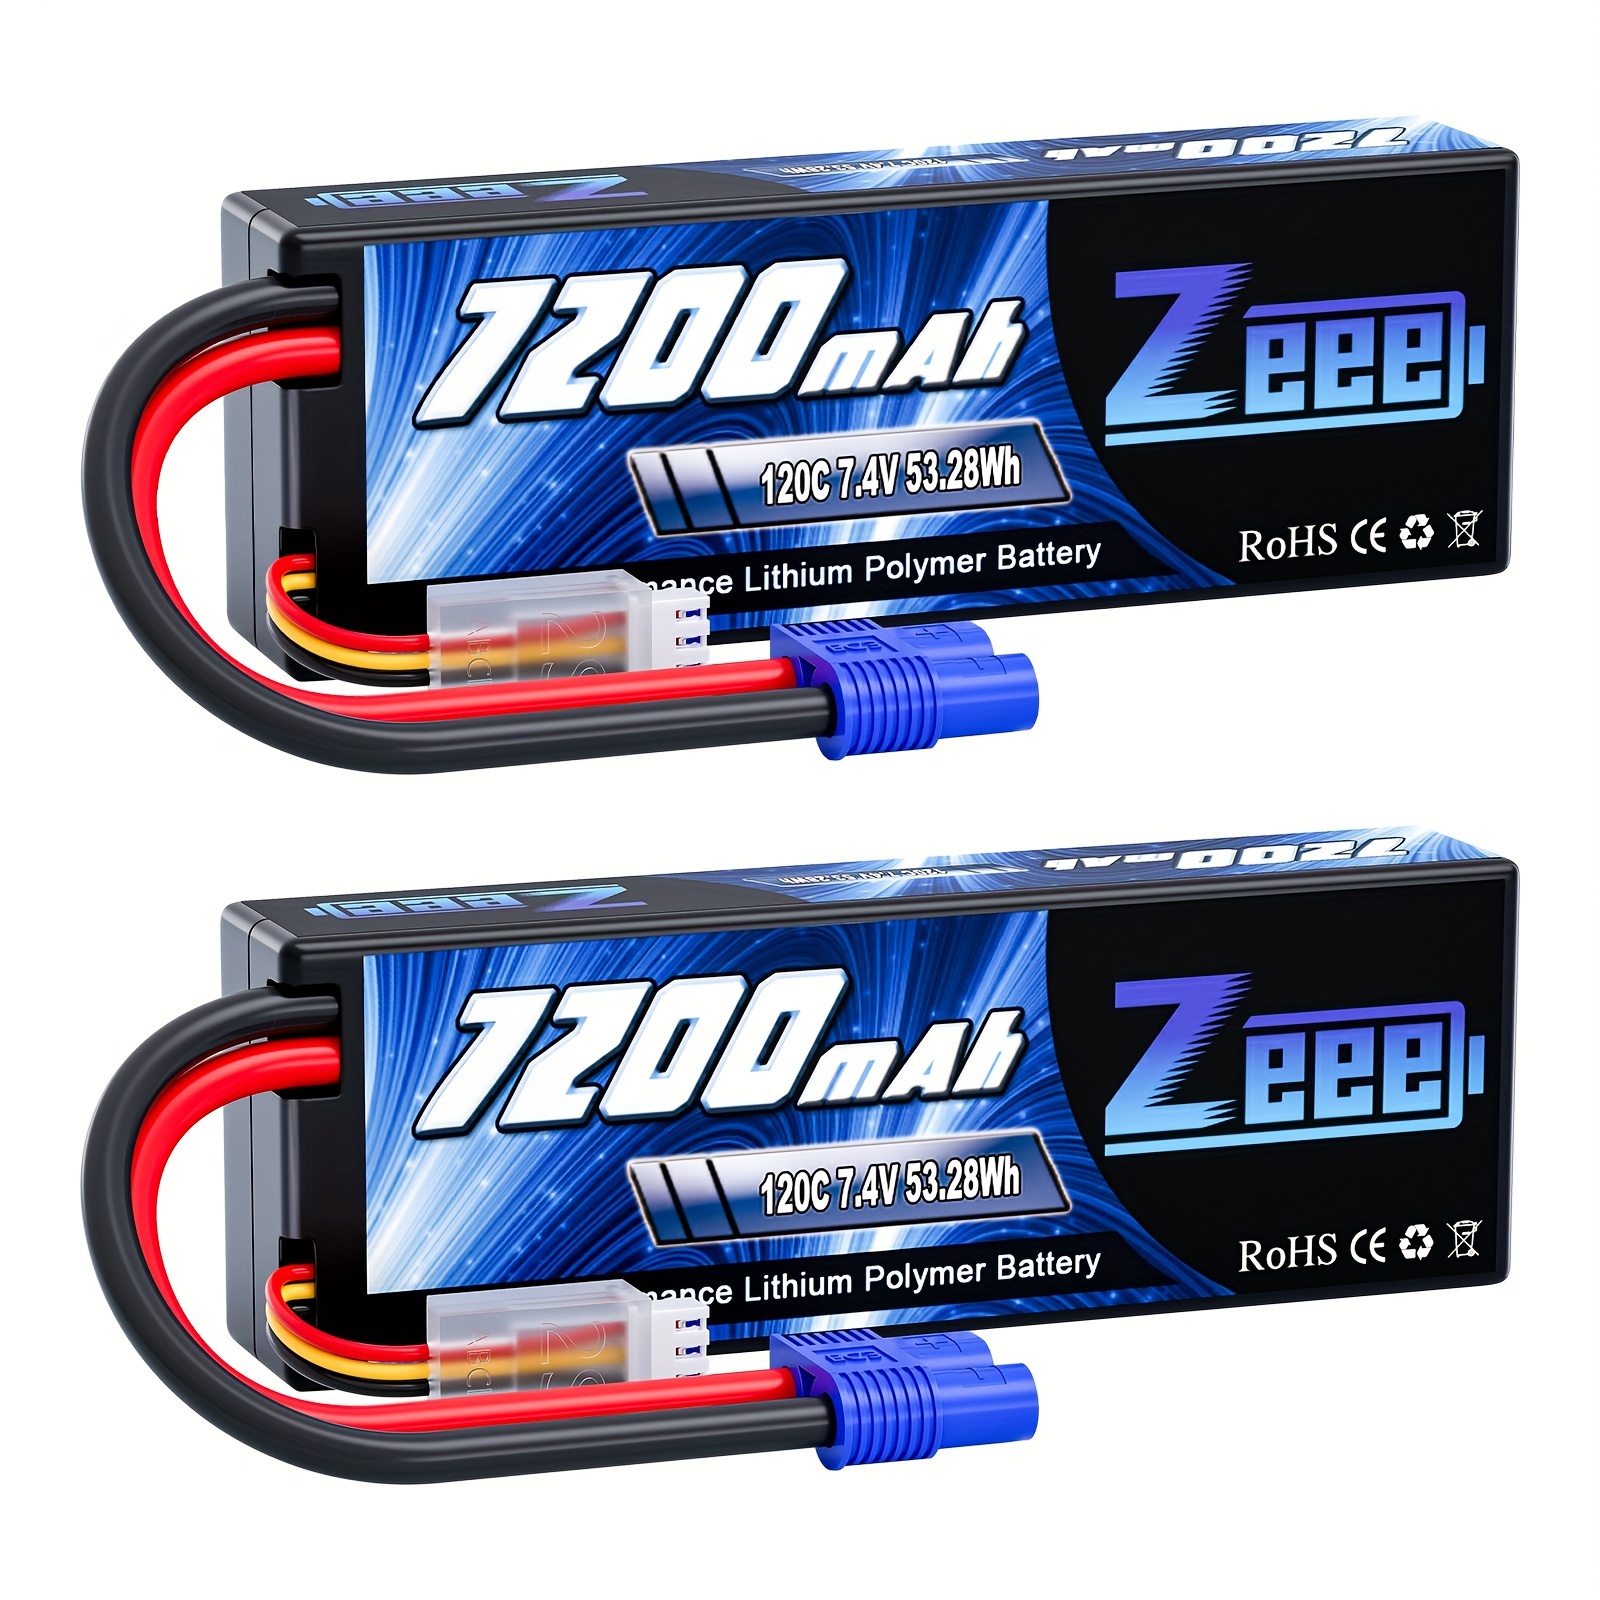 

Zeee 2s Lipo Battery 7200mah 7.4v 120c Hard Case Rc Battery With Ec3 Connector For Rc Car Truck Truggy Buggy Tank 1/10 Scale Racing Models (2 Pack)